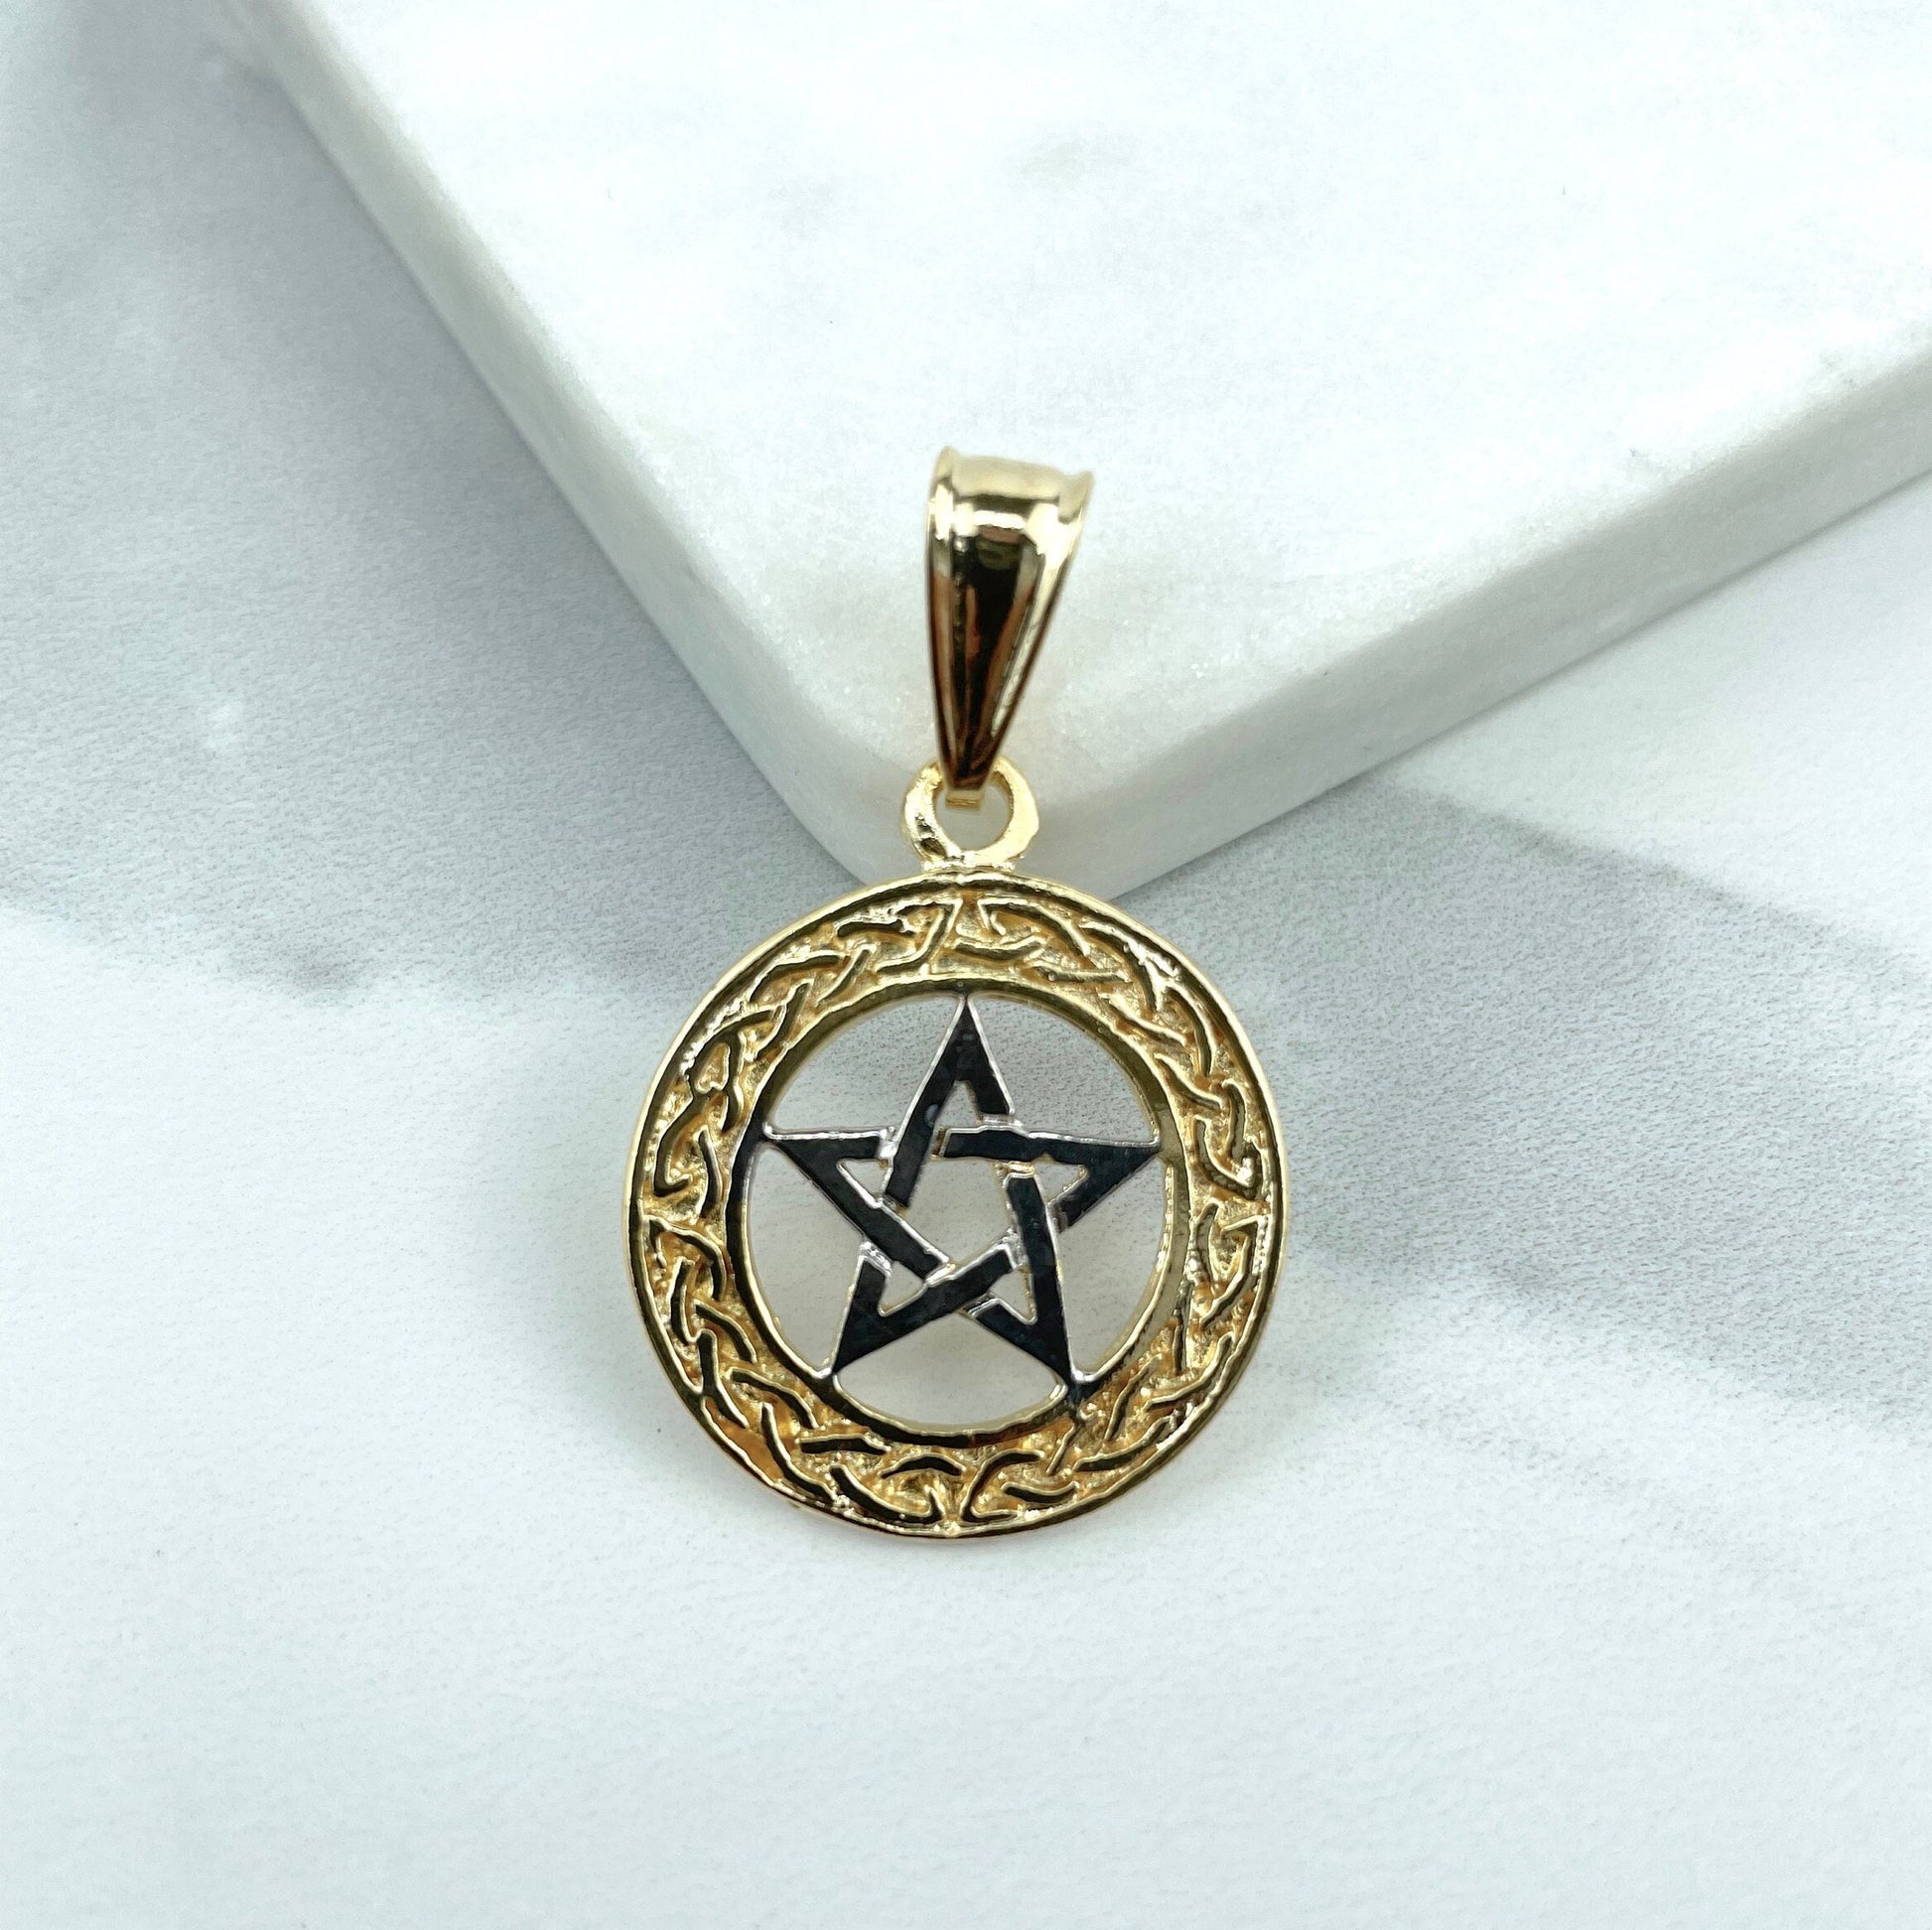 18k Gold Filled Texturized Star Of David Charms Pendant, Two Tone, Jewish Symbol, Religious Jewelry, Wholesale Jewelry Making Supplies